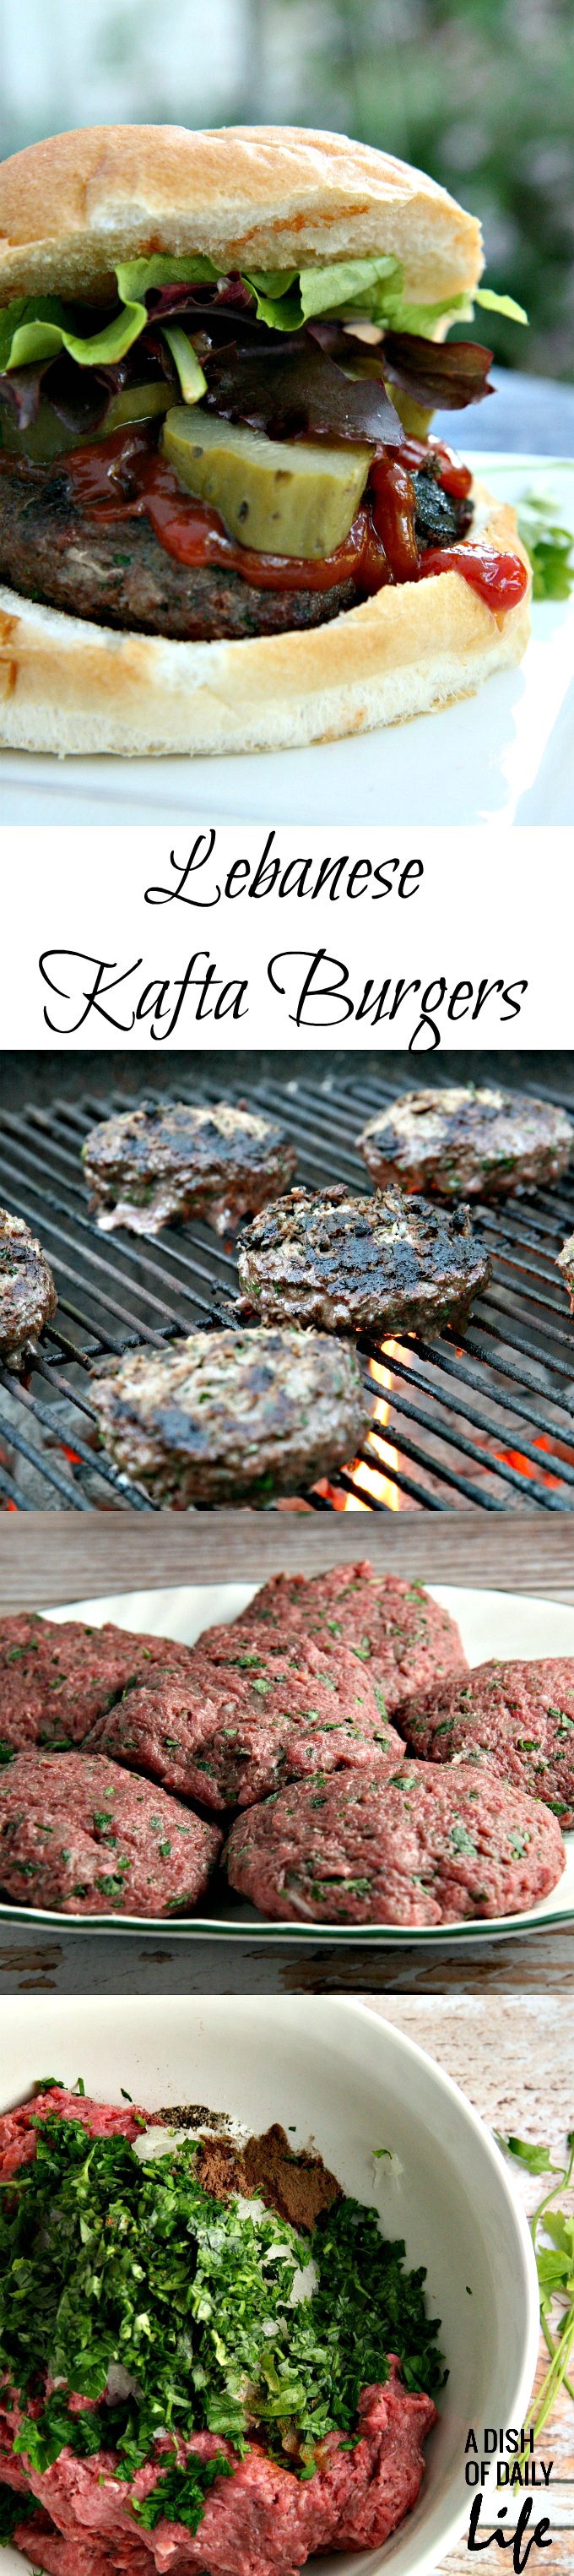 Traditionally served "finger-shaped" on a skewer, this grilling recipe for Lebanese Kafta Burgers with Lamb and Beef combines Middle Eastern roots with a classic hamburger!